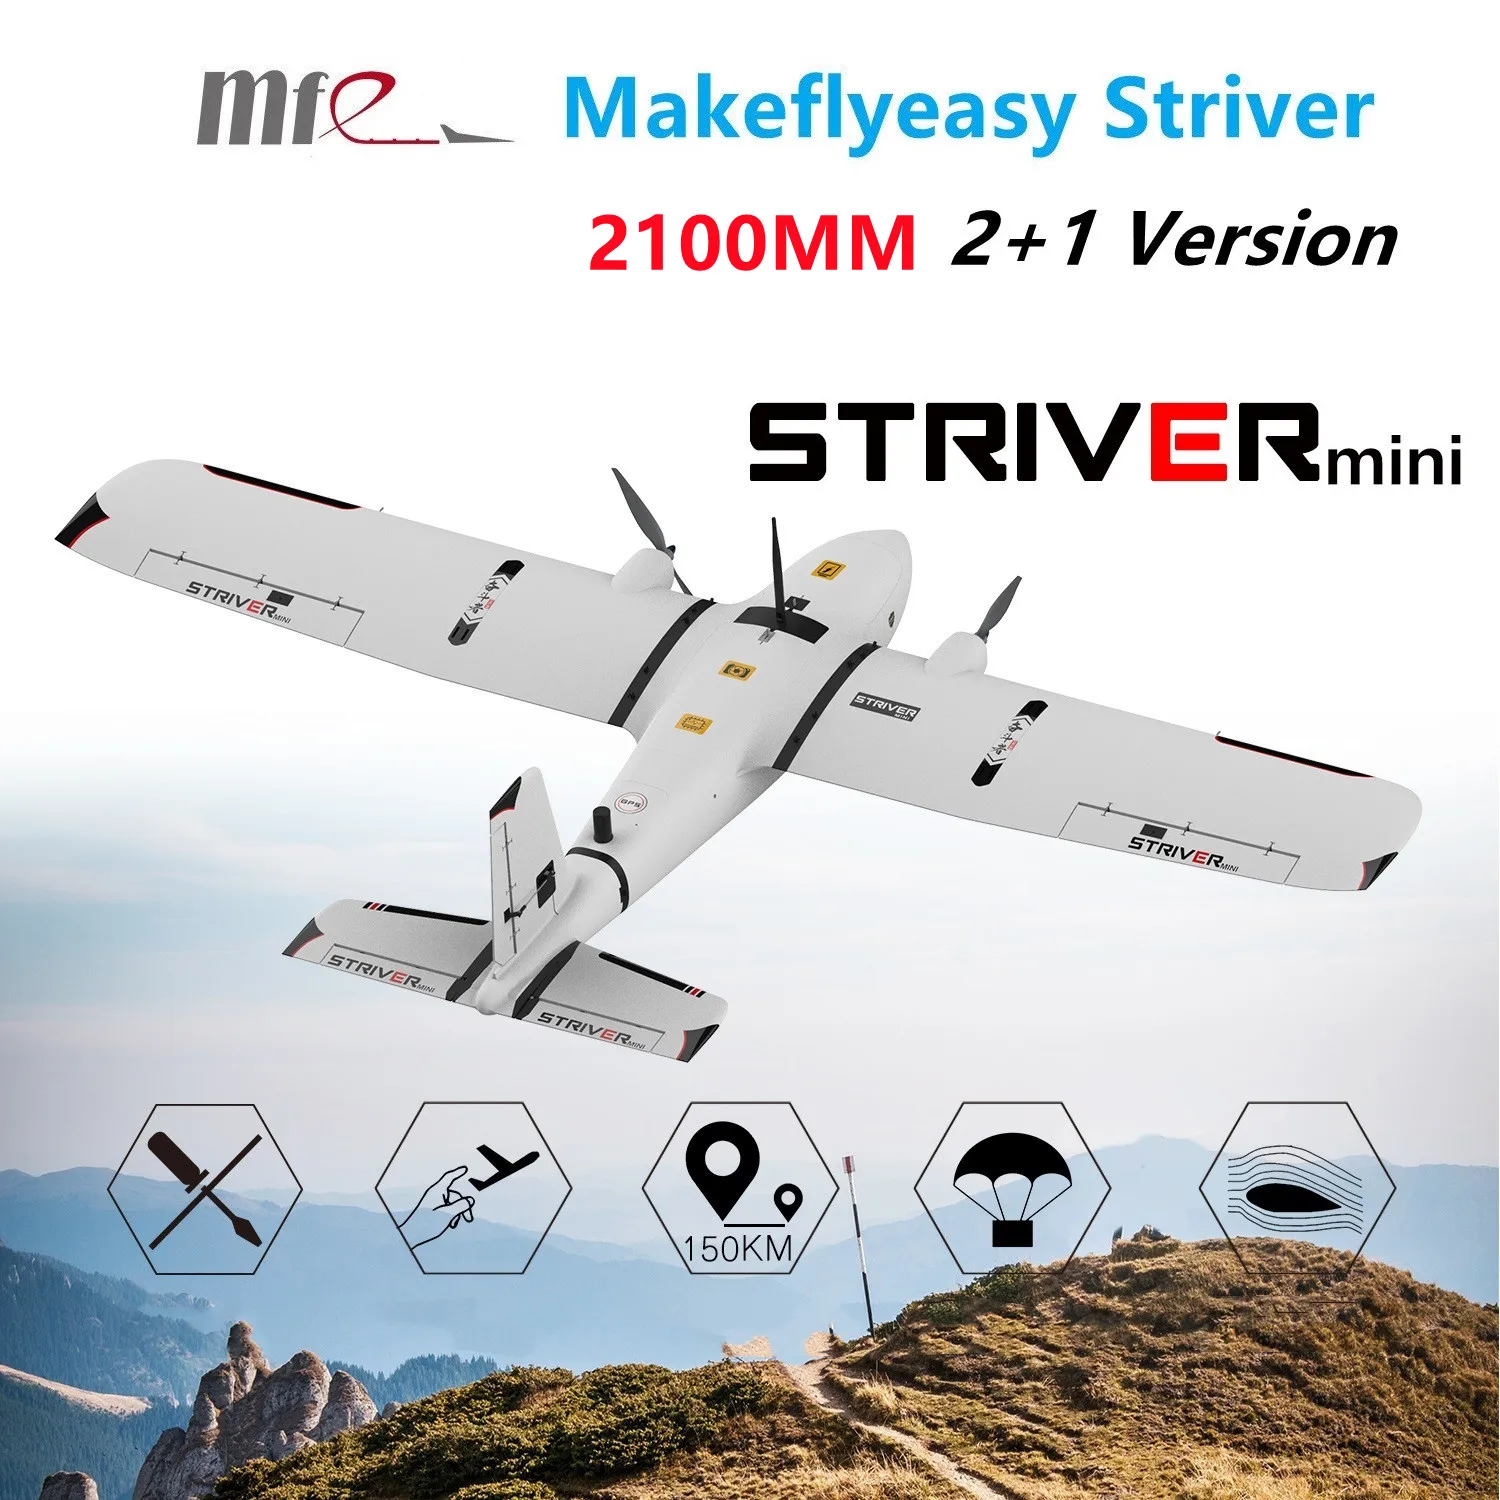 

Makeflyeasy Striver mini Hand 2100mm 2+1 Version Aerial Survey Carrier Fix-wing UAV Aircraft Mapping RC FPV Airplane